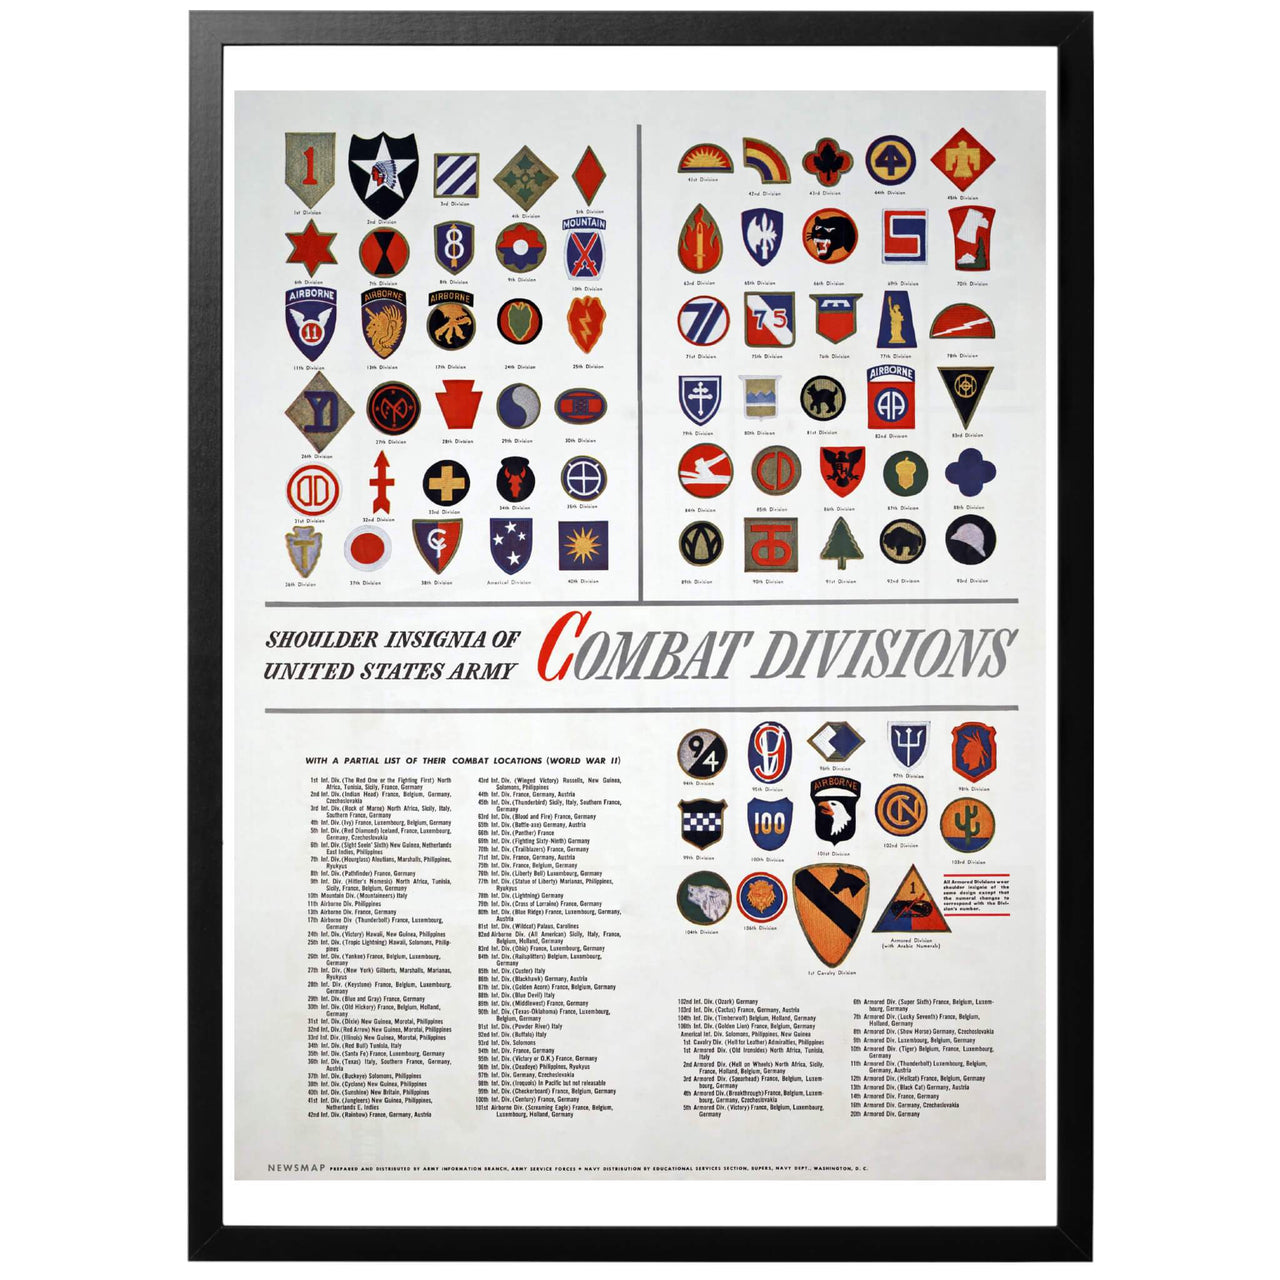 US Army Shoulder Insignia Poster